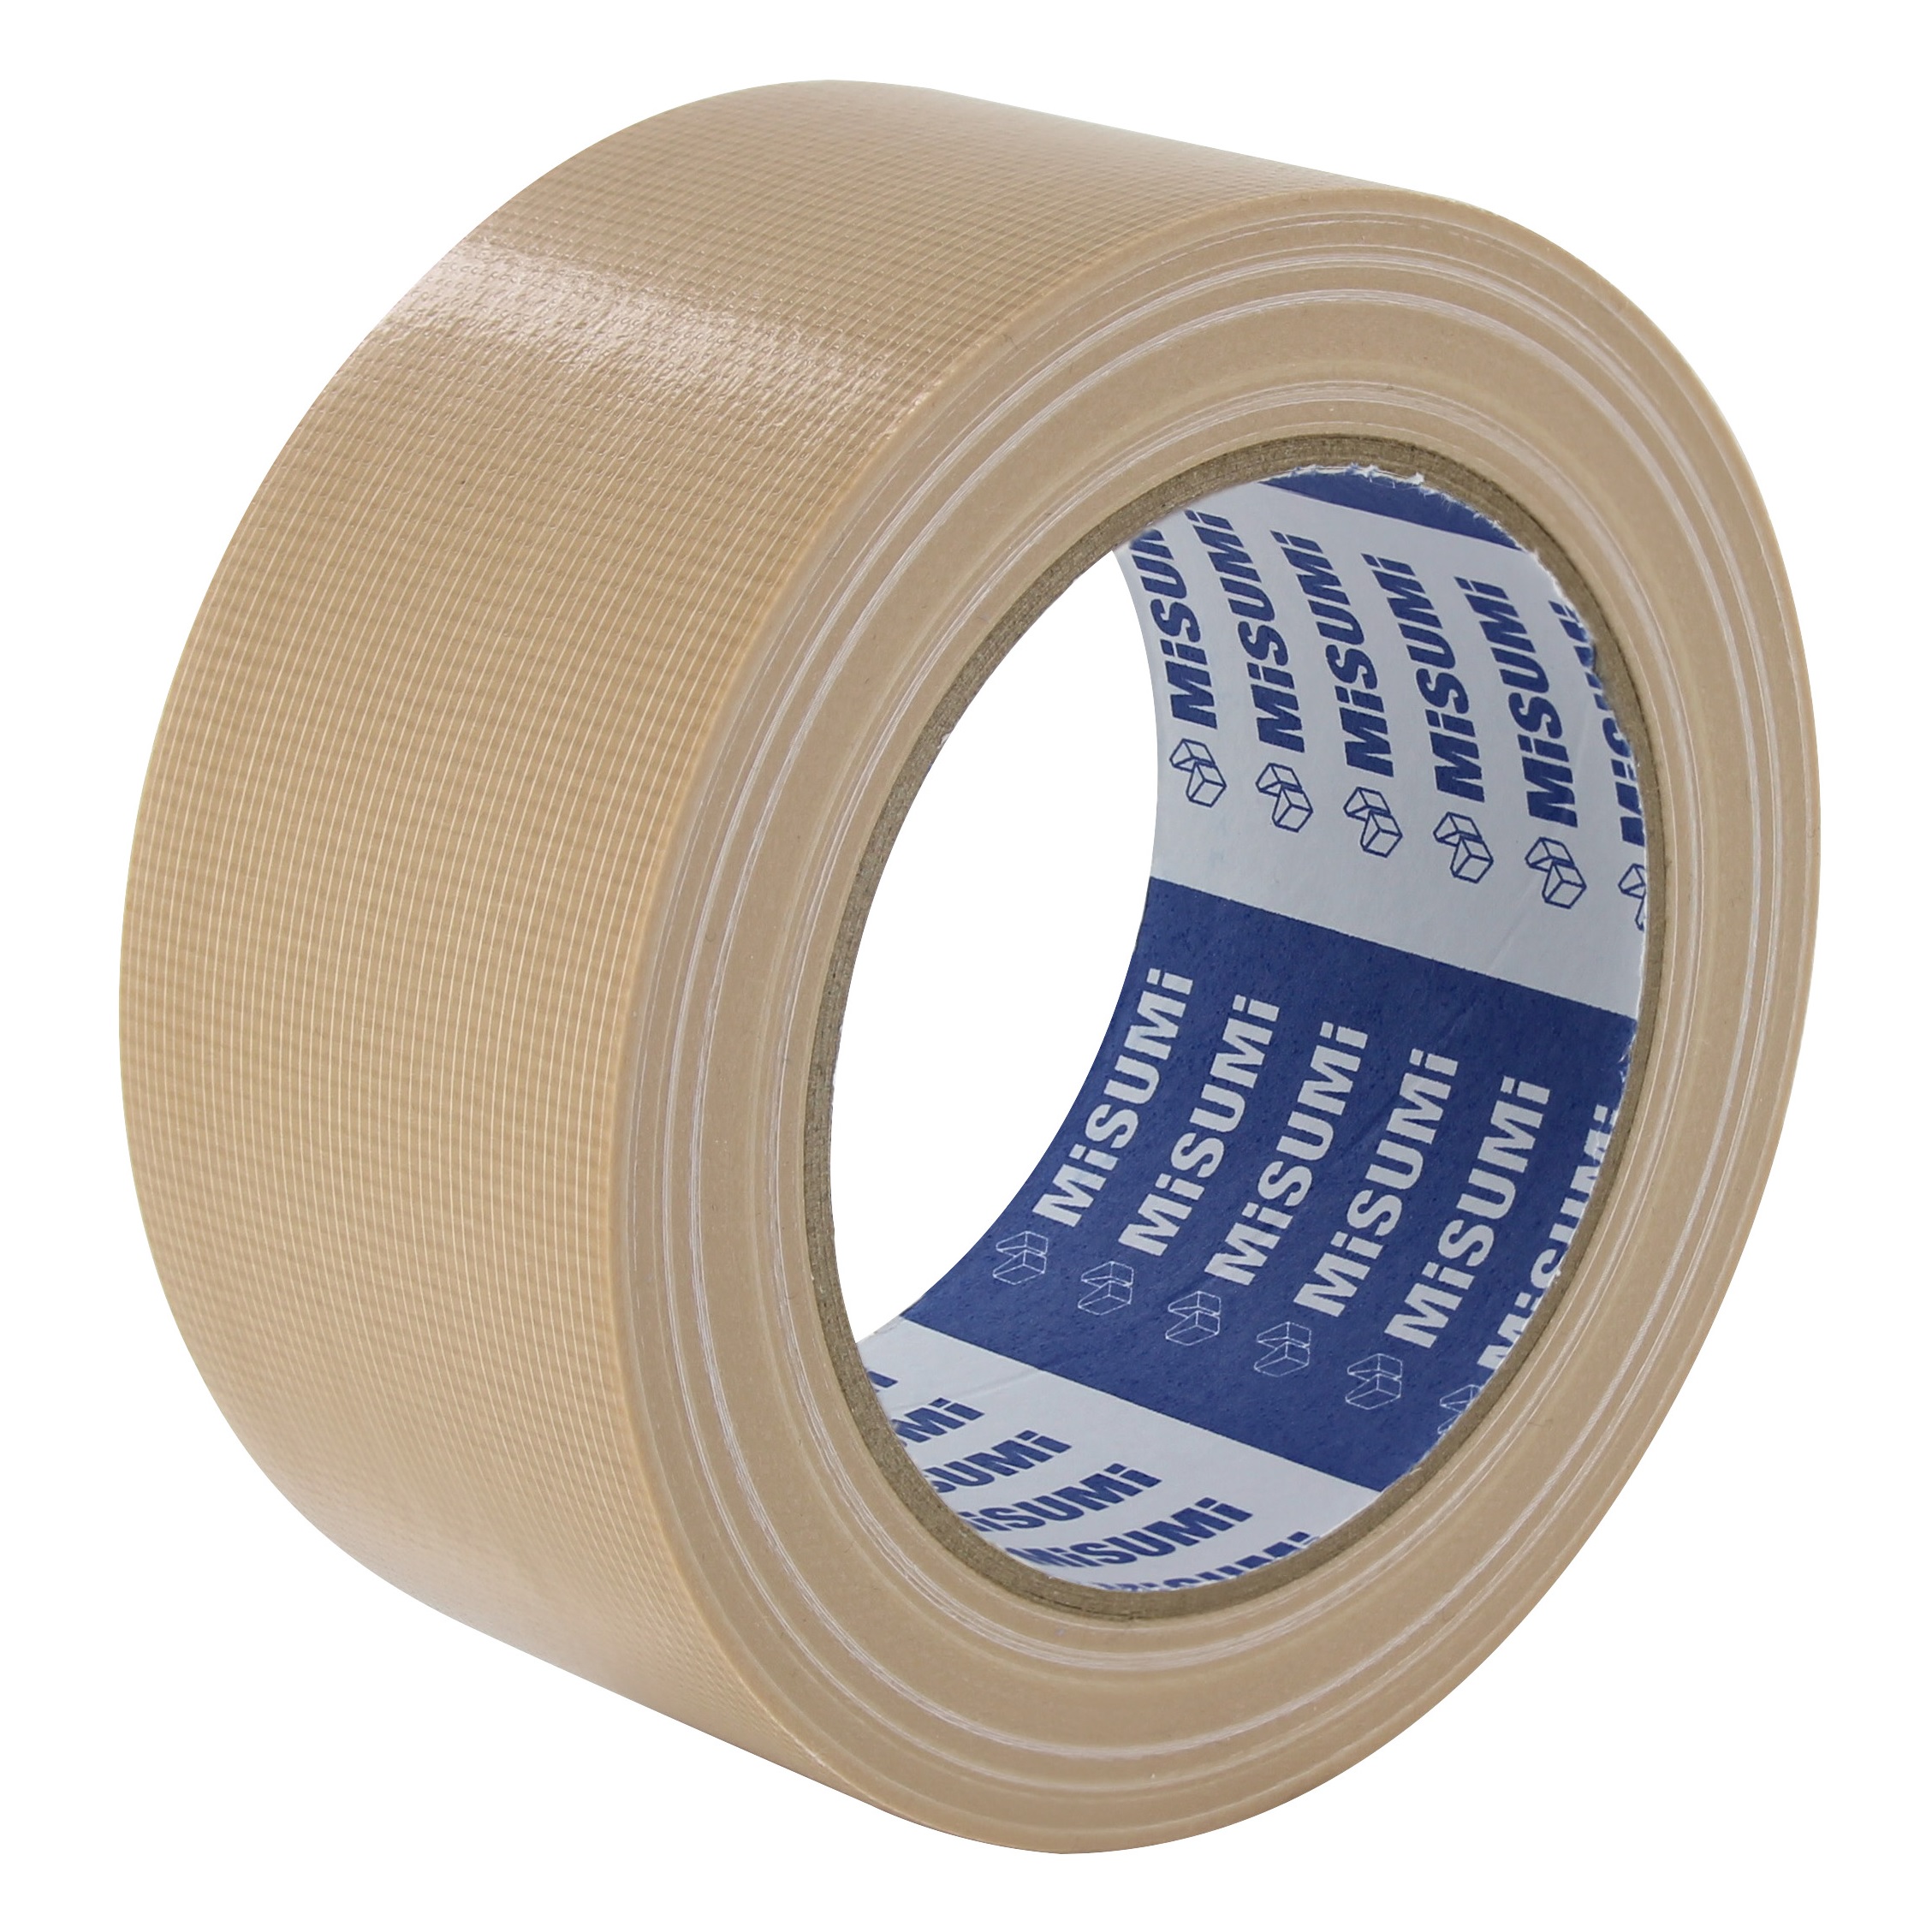 Tape Supplies from SEKISUI CHEMICAL